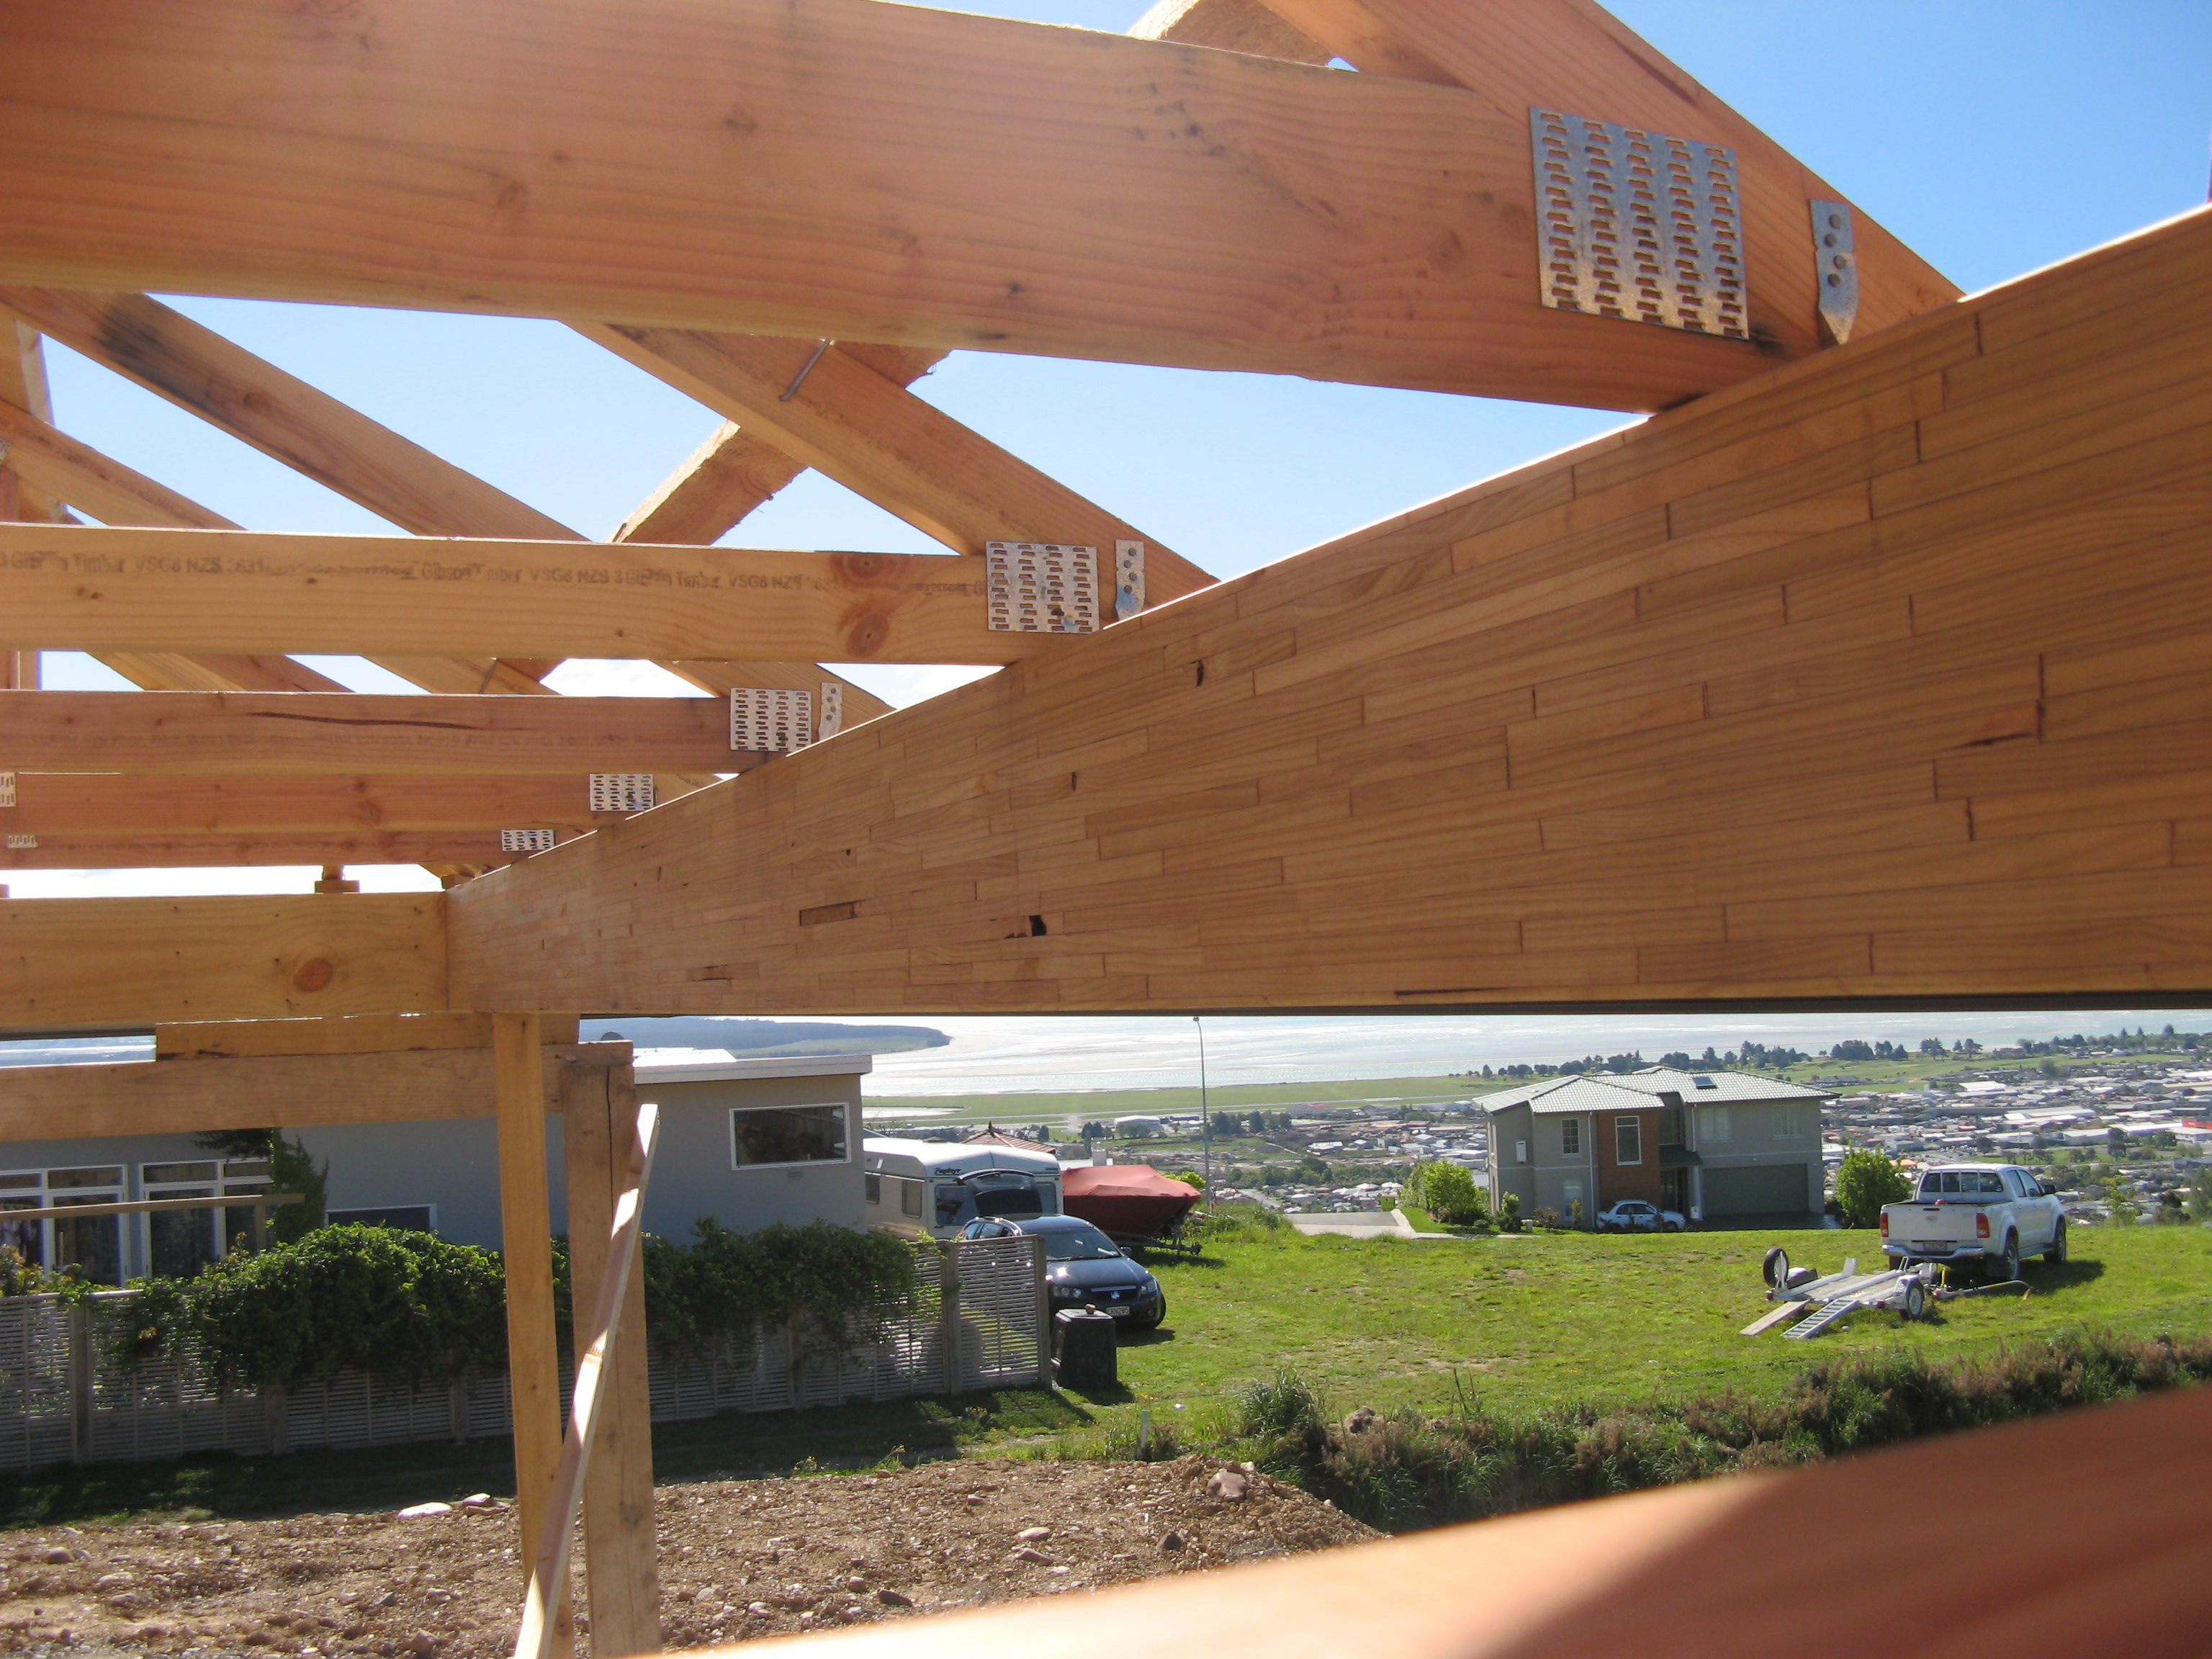 for pergola use rafter span tables